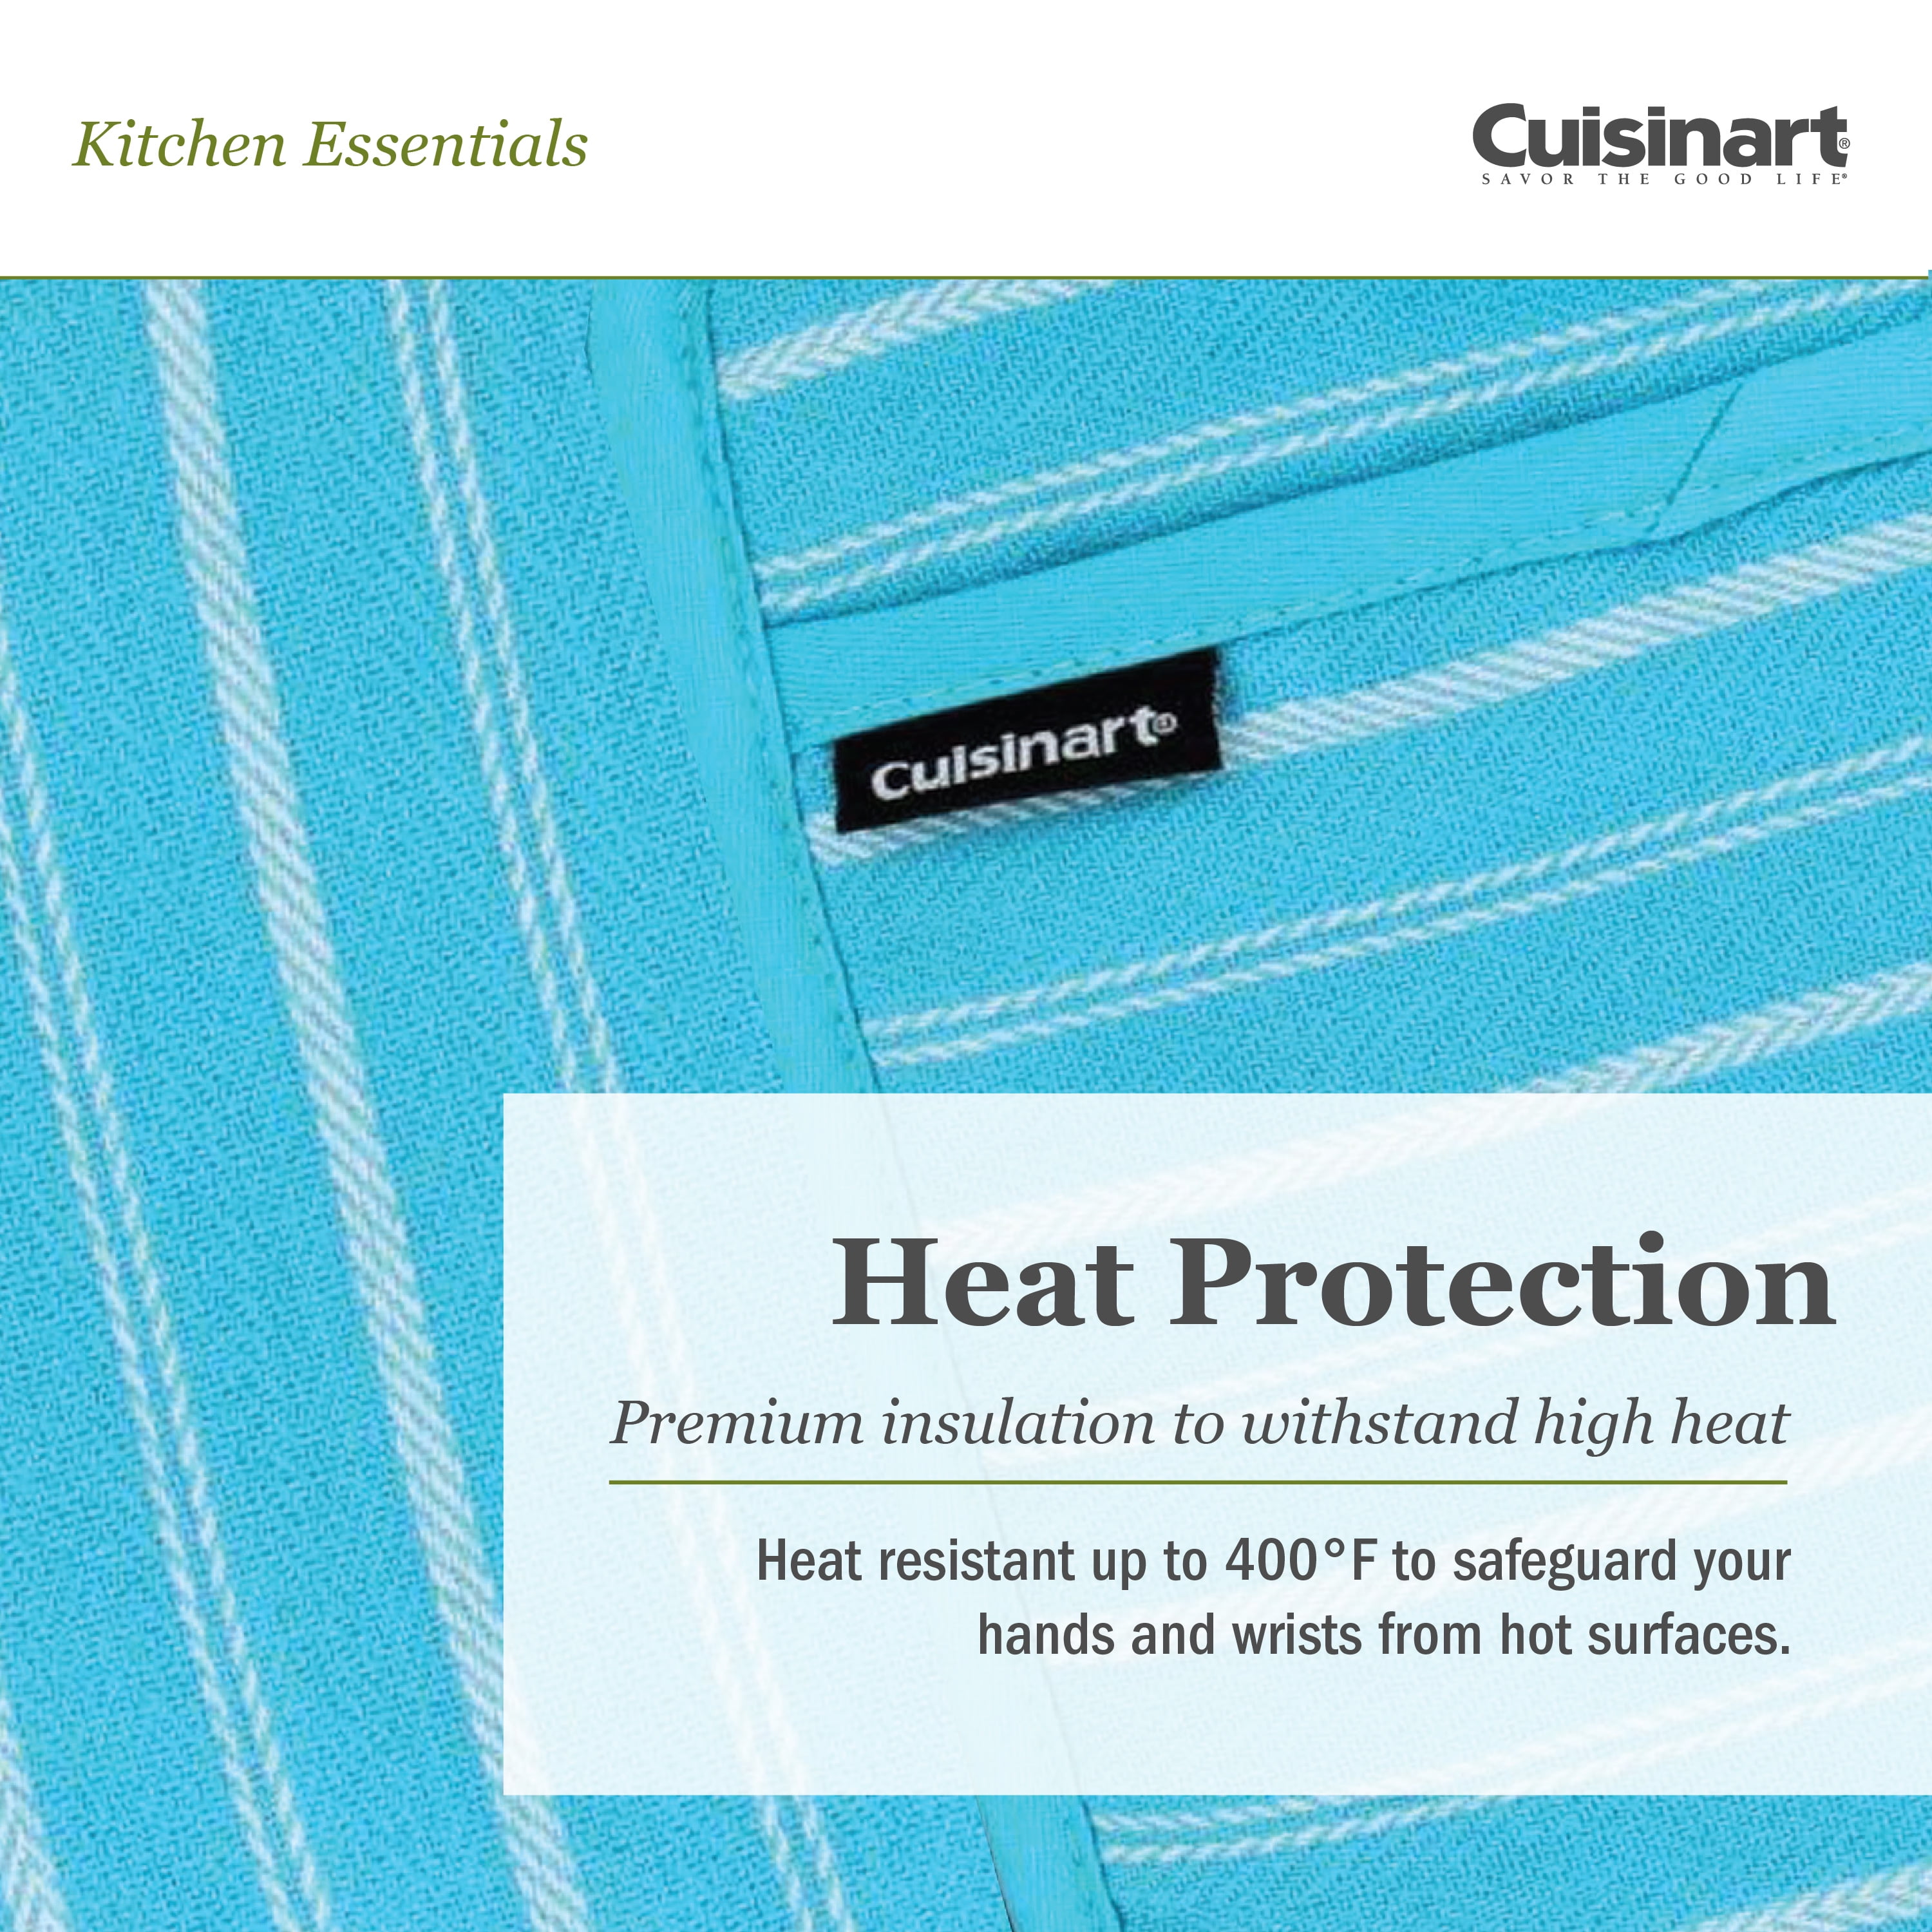 Cuisinart Kitchen Oven Mitt/Glove & Rectangle Potholder with Pocket Set  w/Neoprene for Easy Gripping, Heat Resistant up to 500 degrees F, Twill